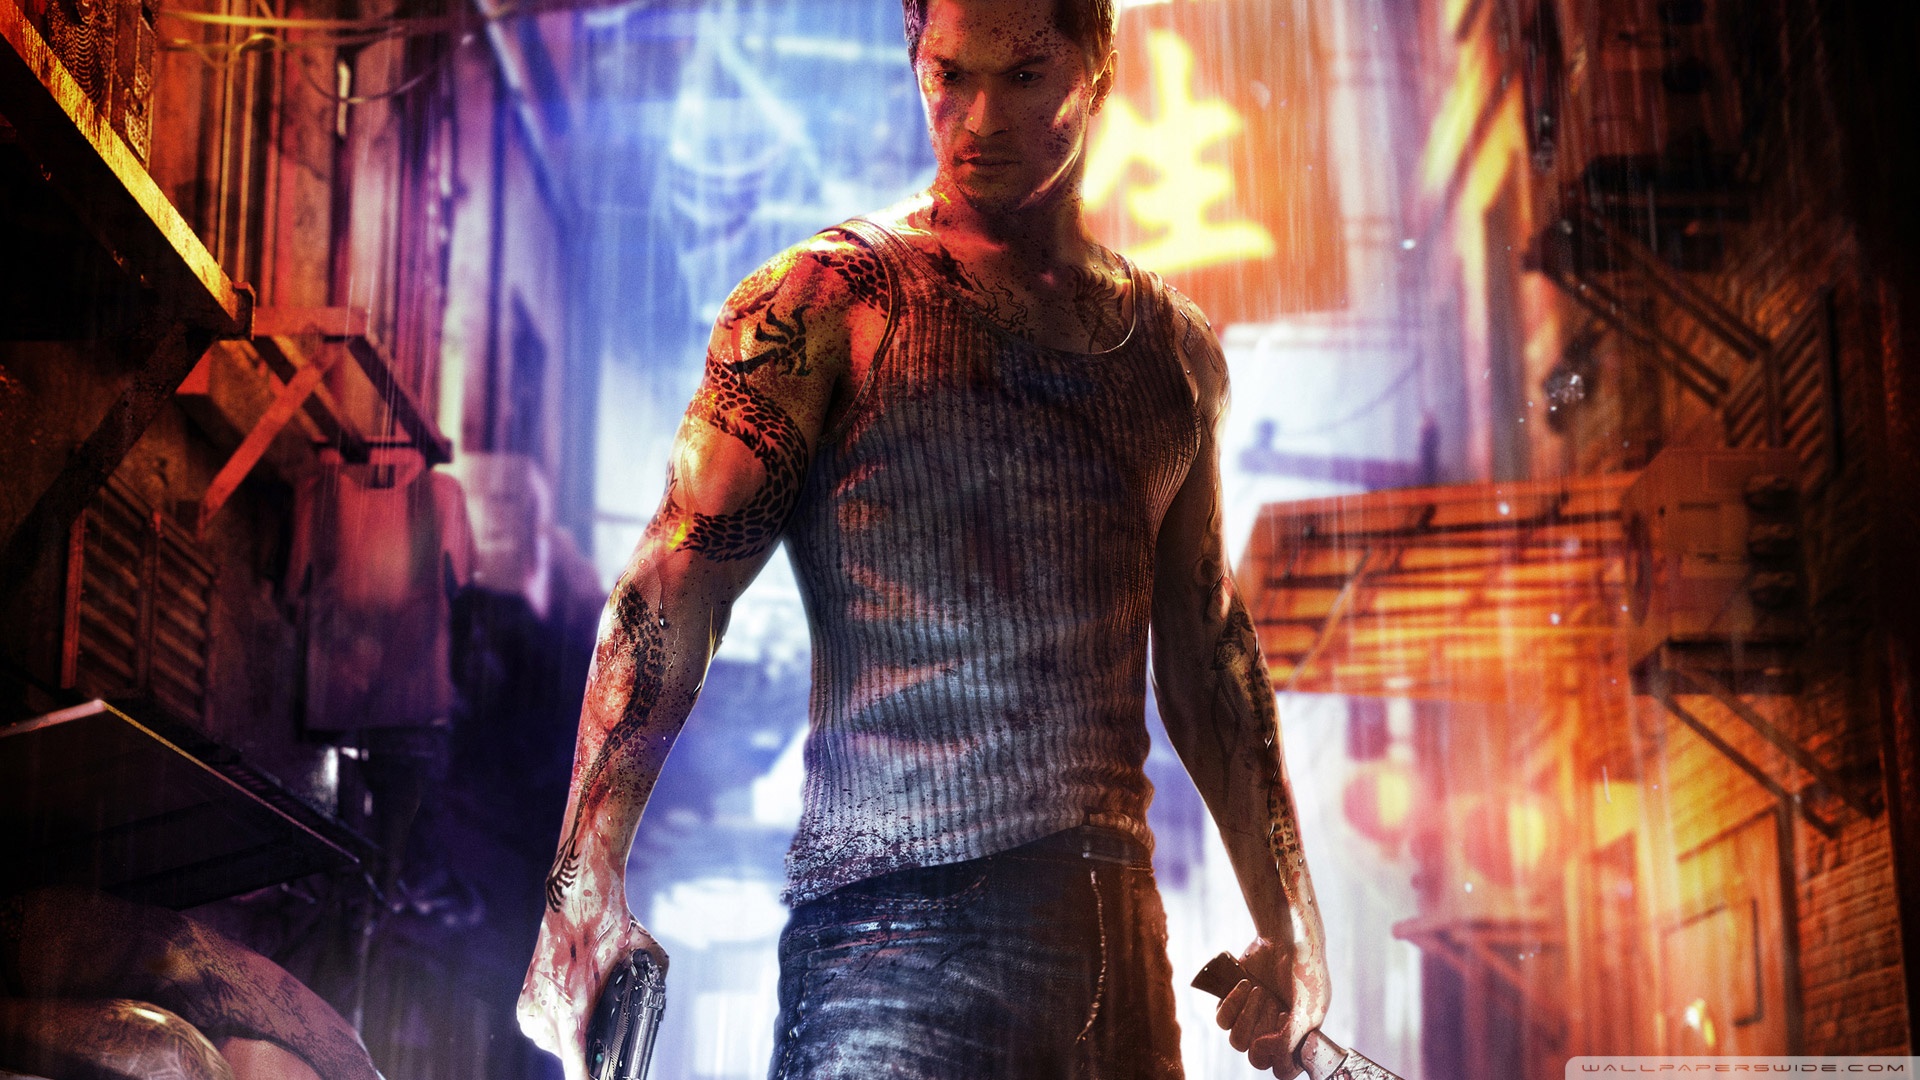 Sleeping Dogs Wallpapers